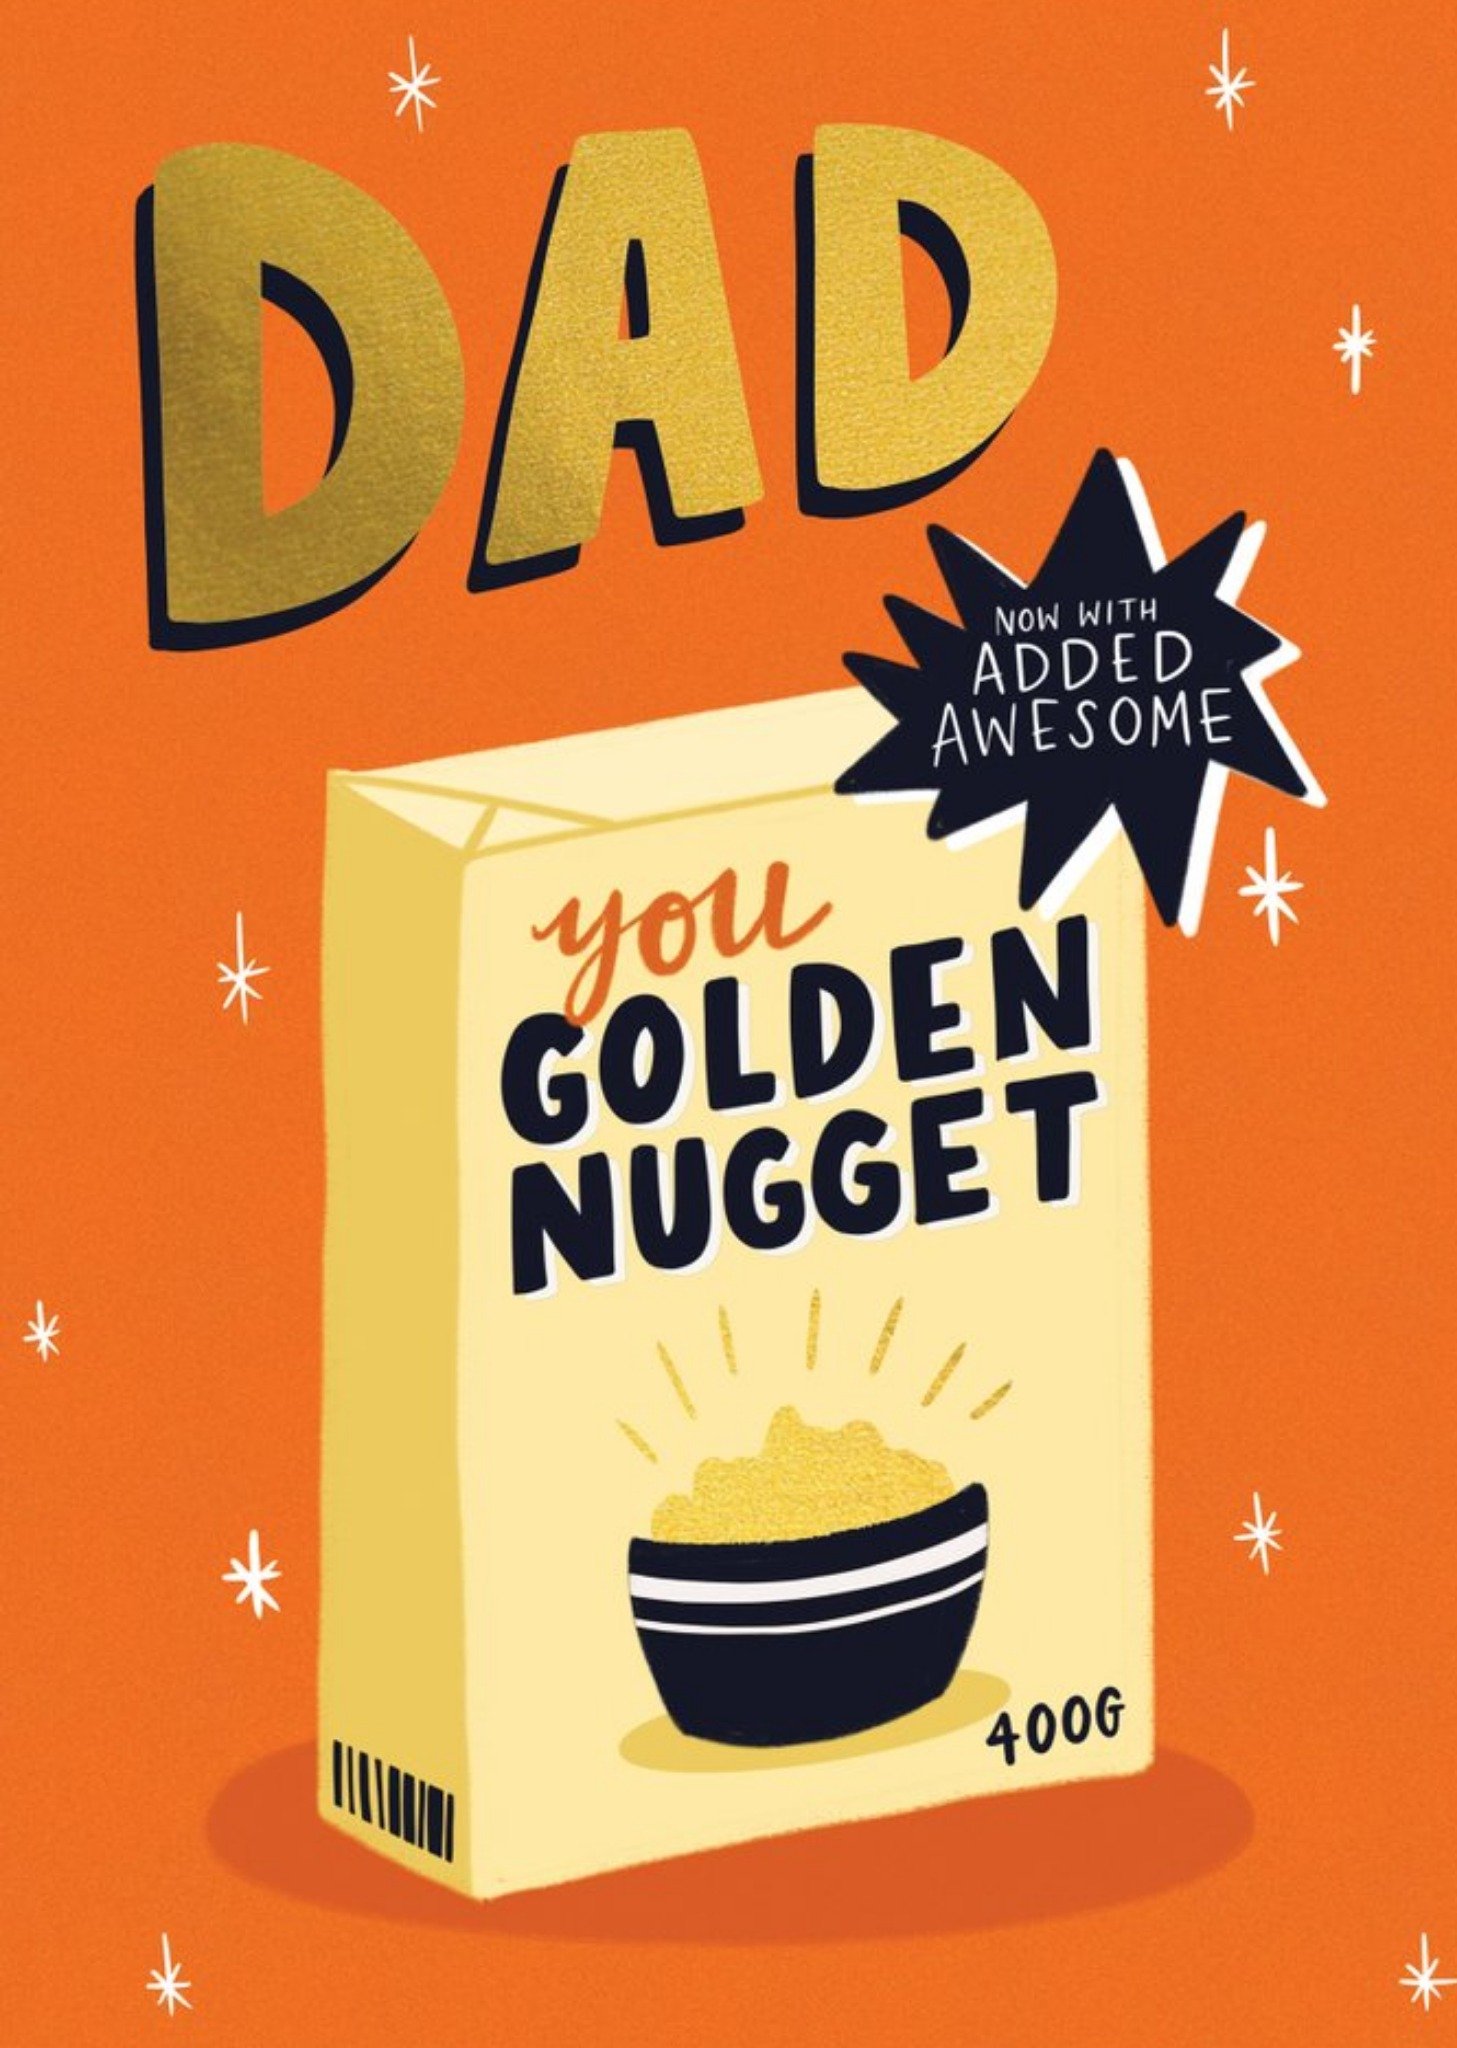 Moonpig Cereal Box You Golden Nugget Father's Day Card Ecard